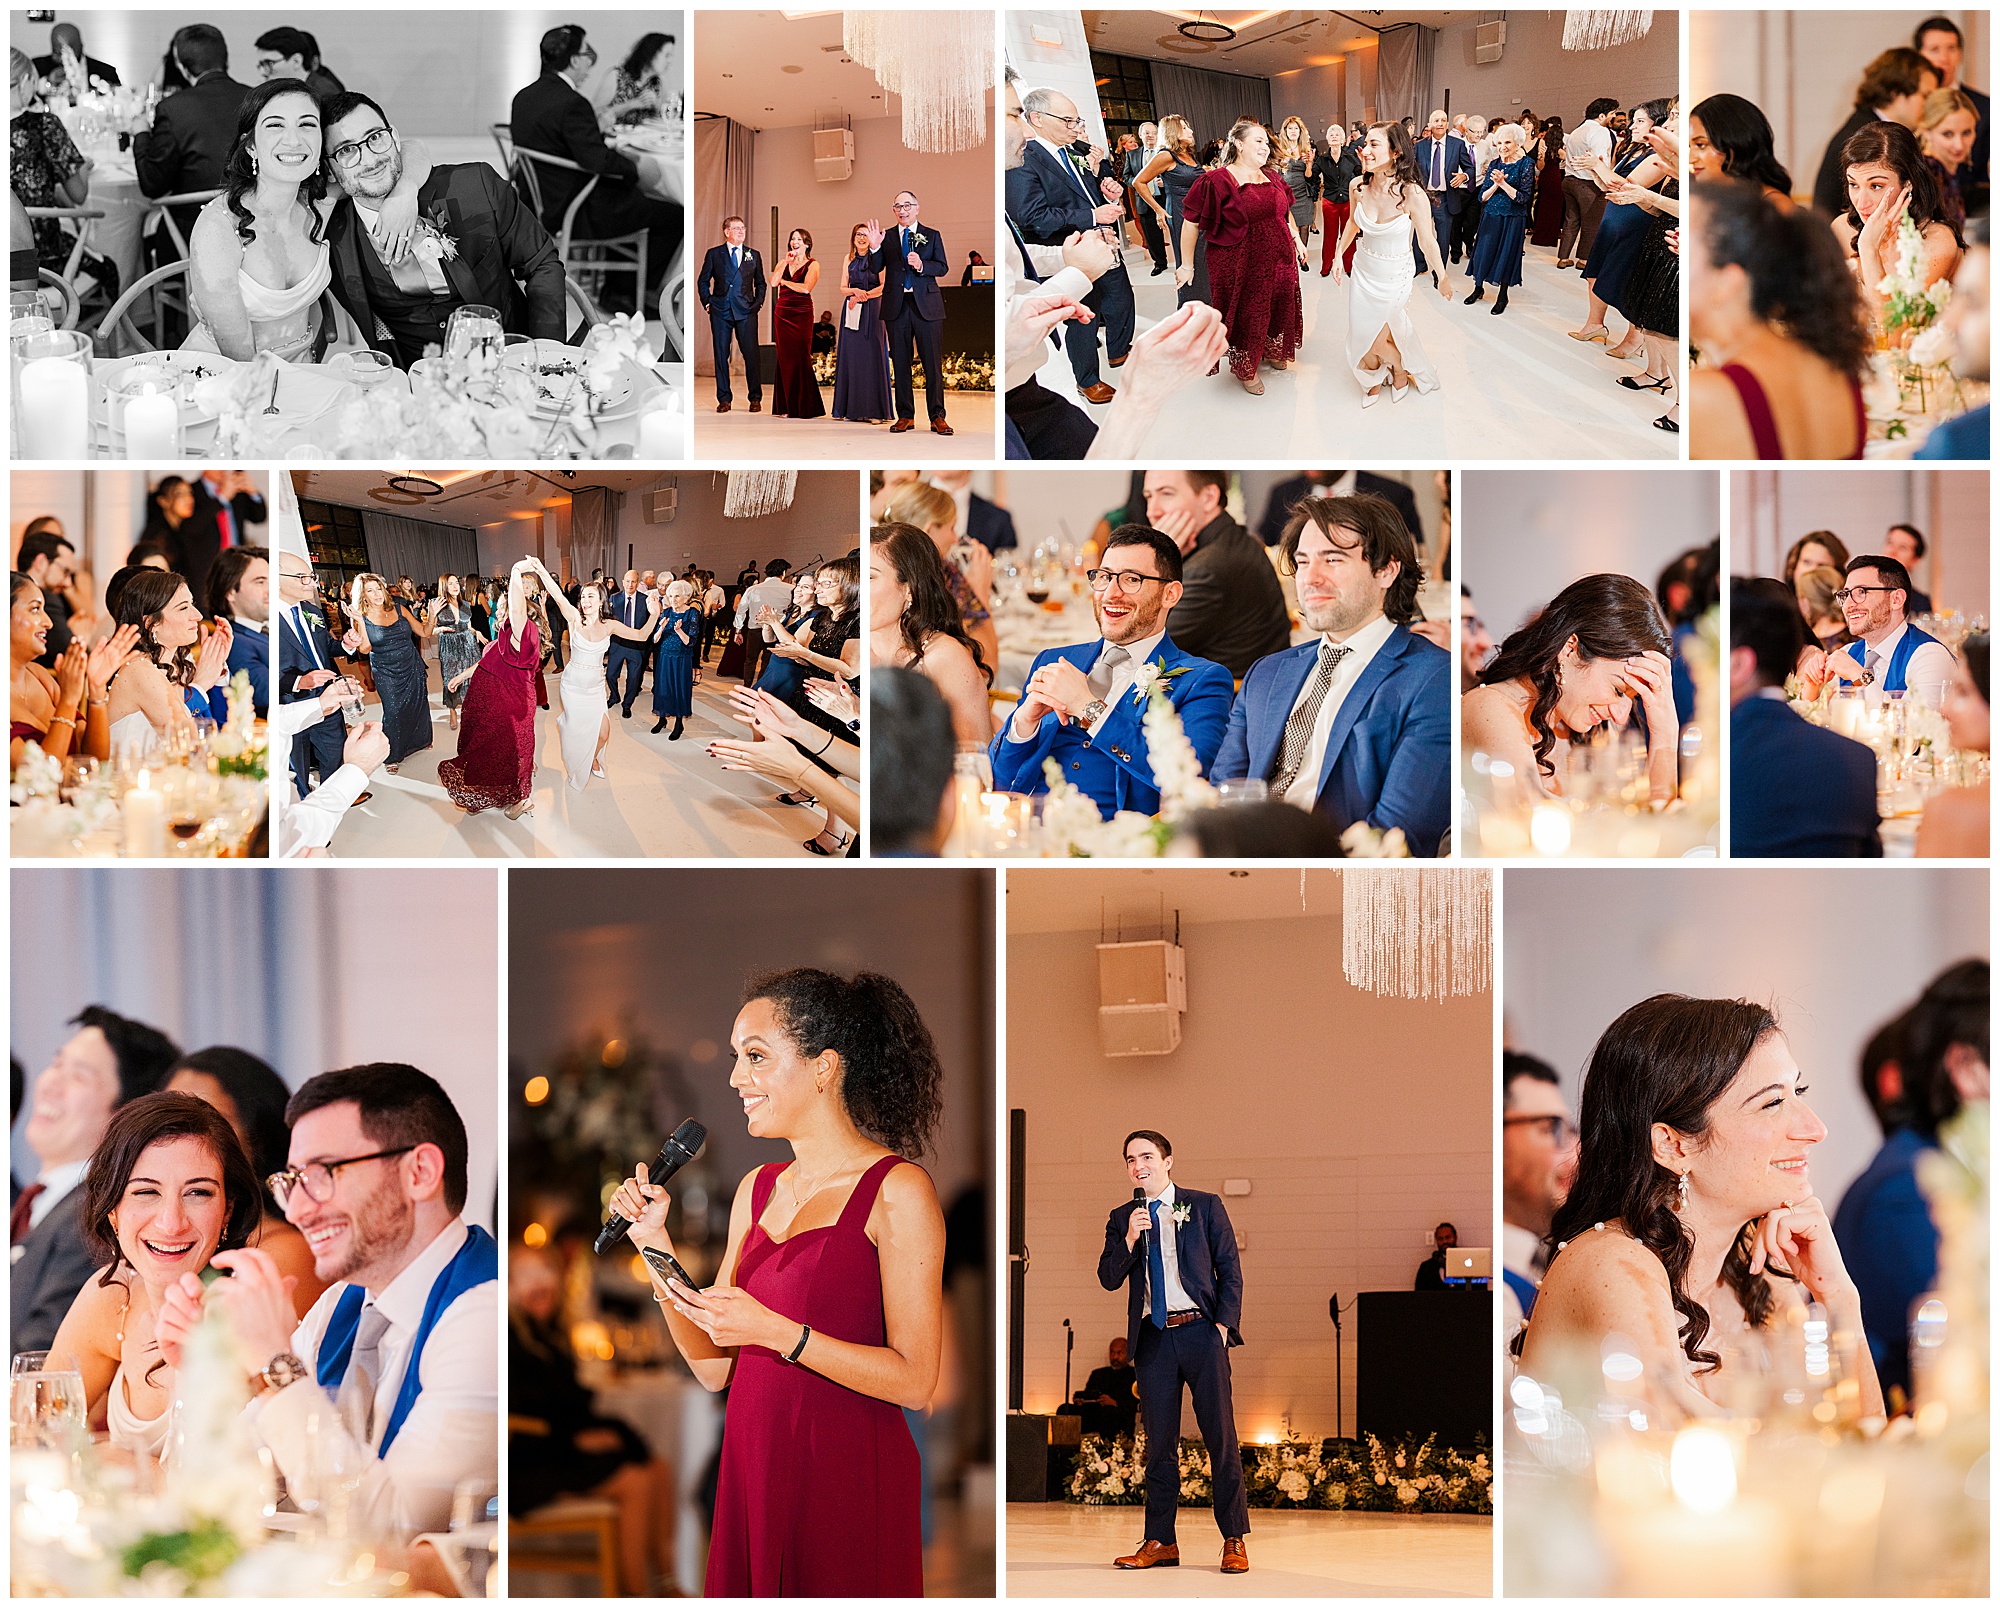 Special winter wedding at the ravel hotel